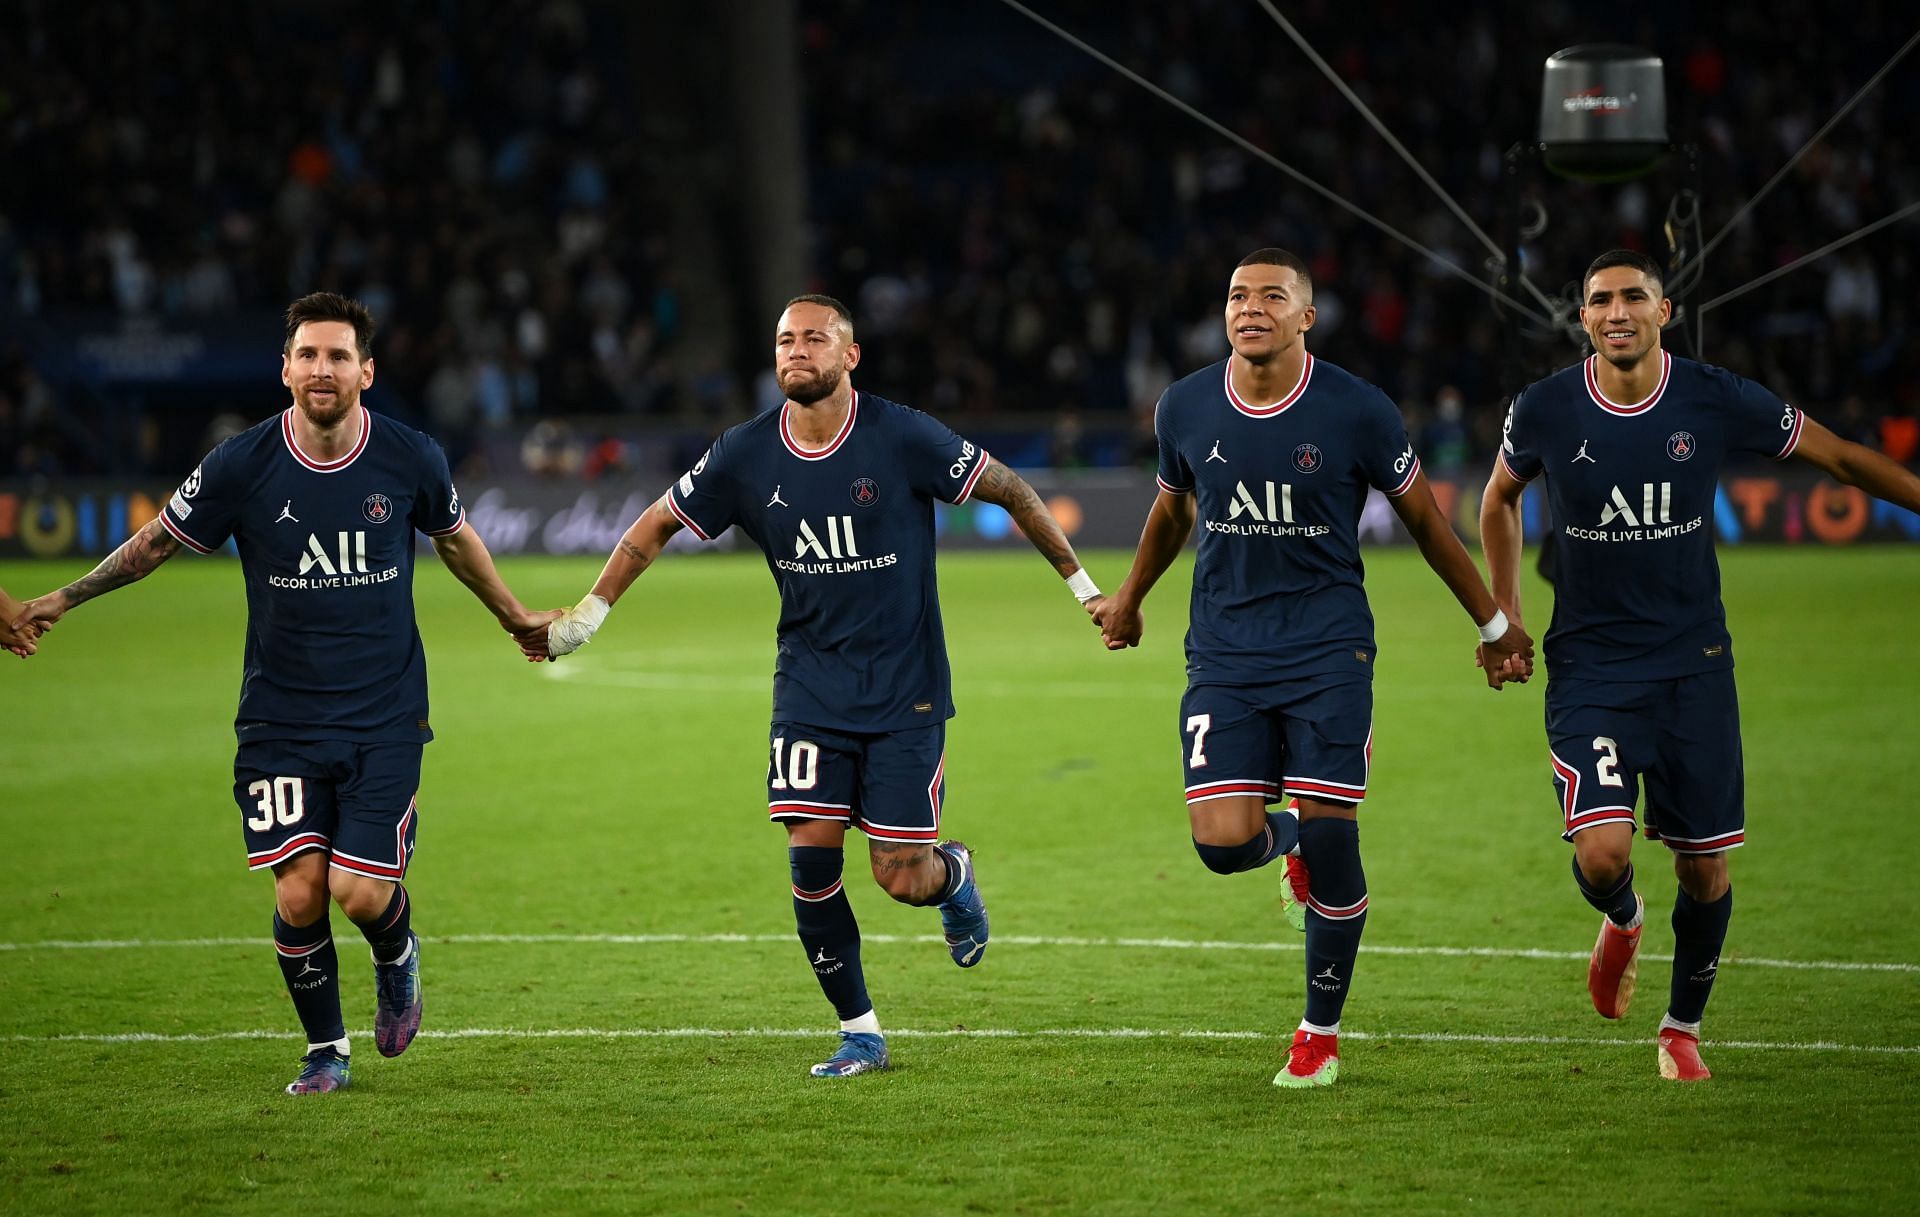 PSG take on Angers in Ligue 1 this weekend